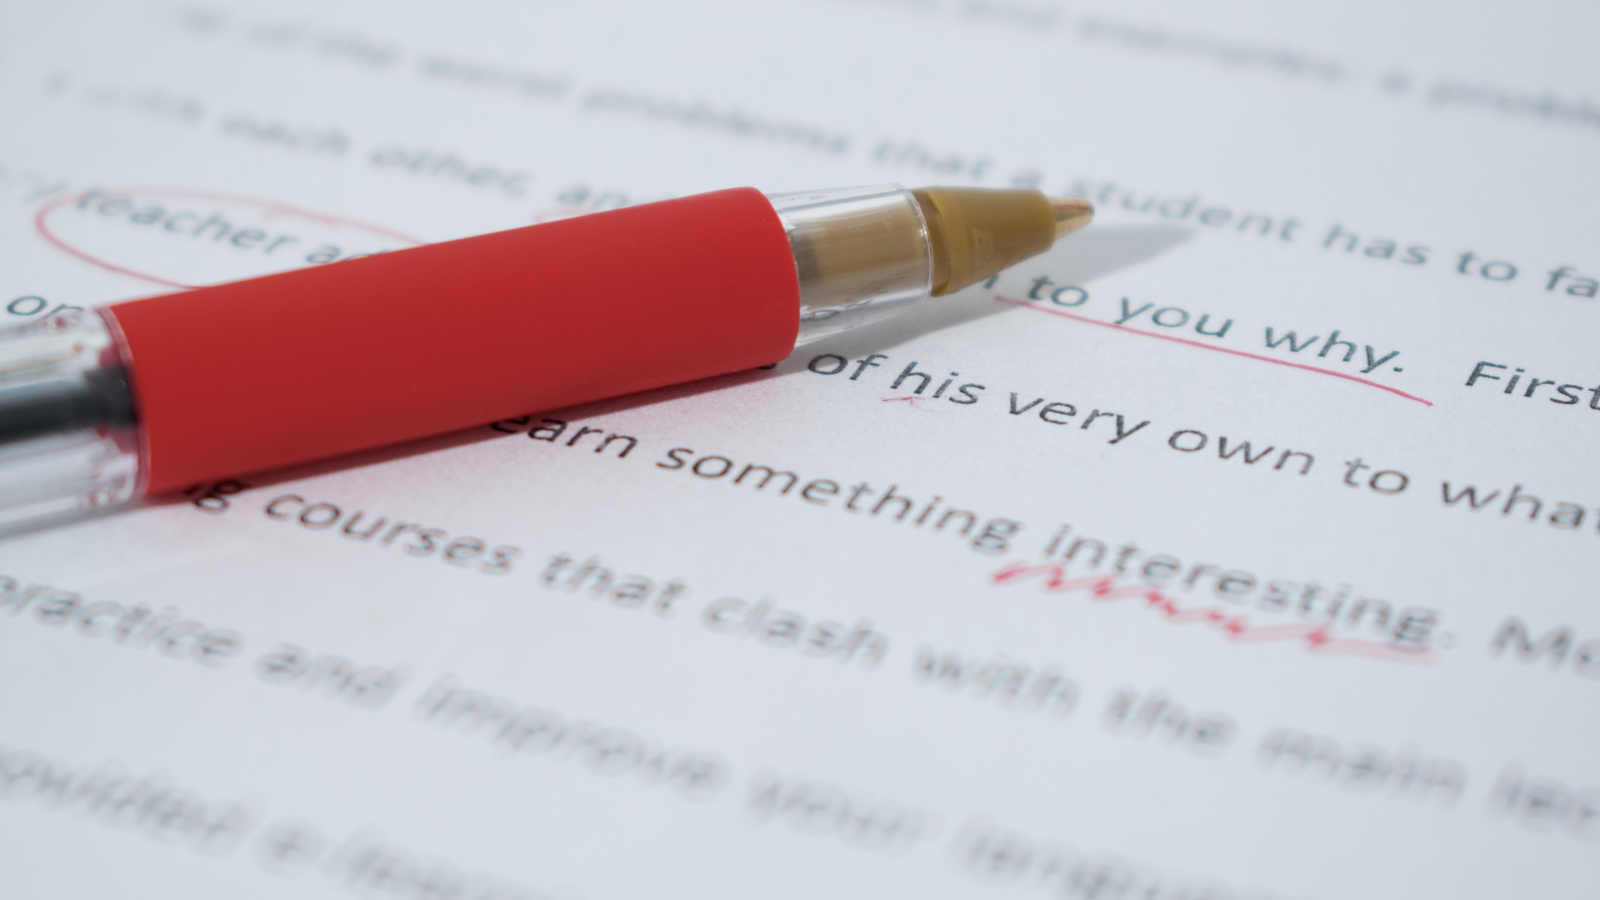 red ink pen lays on top of document being edited